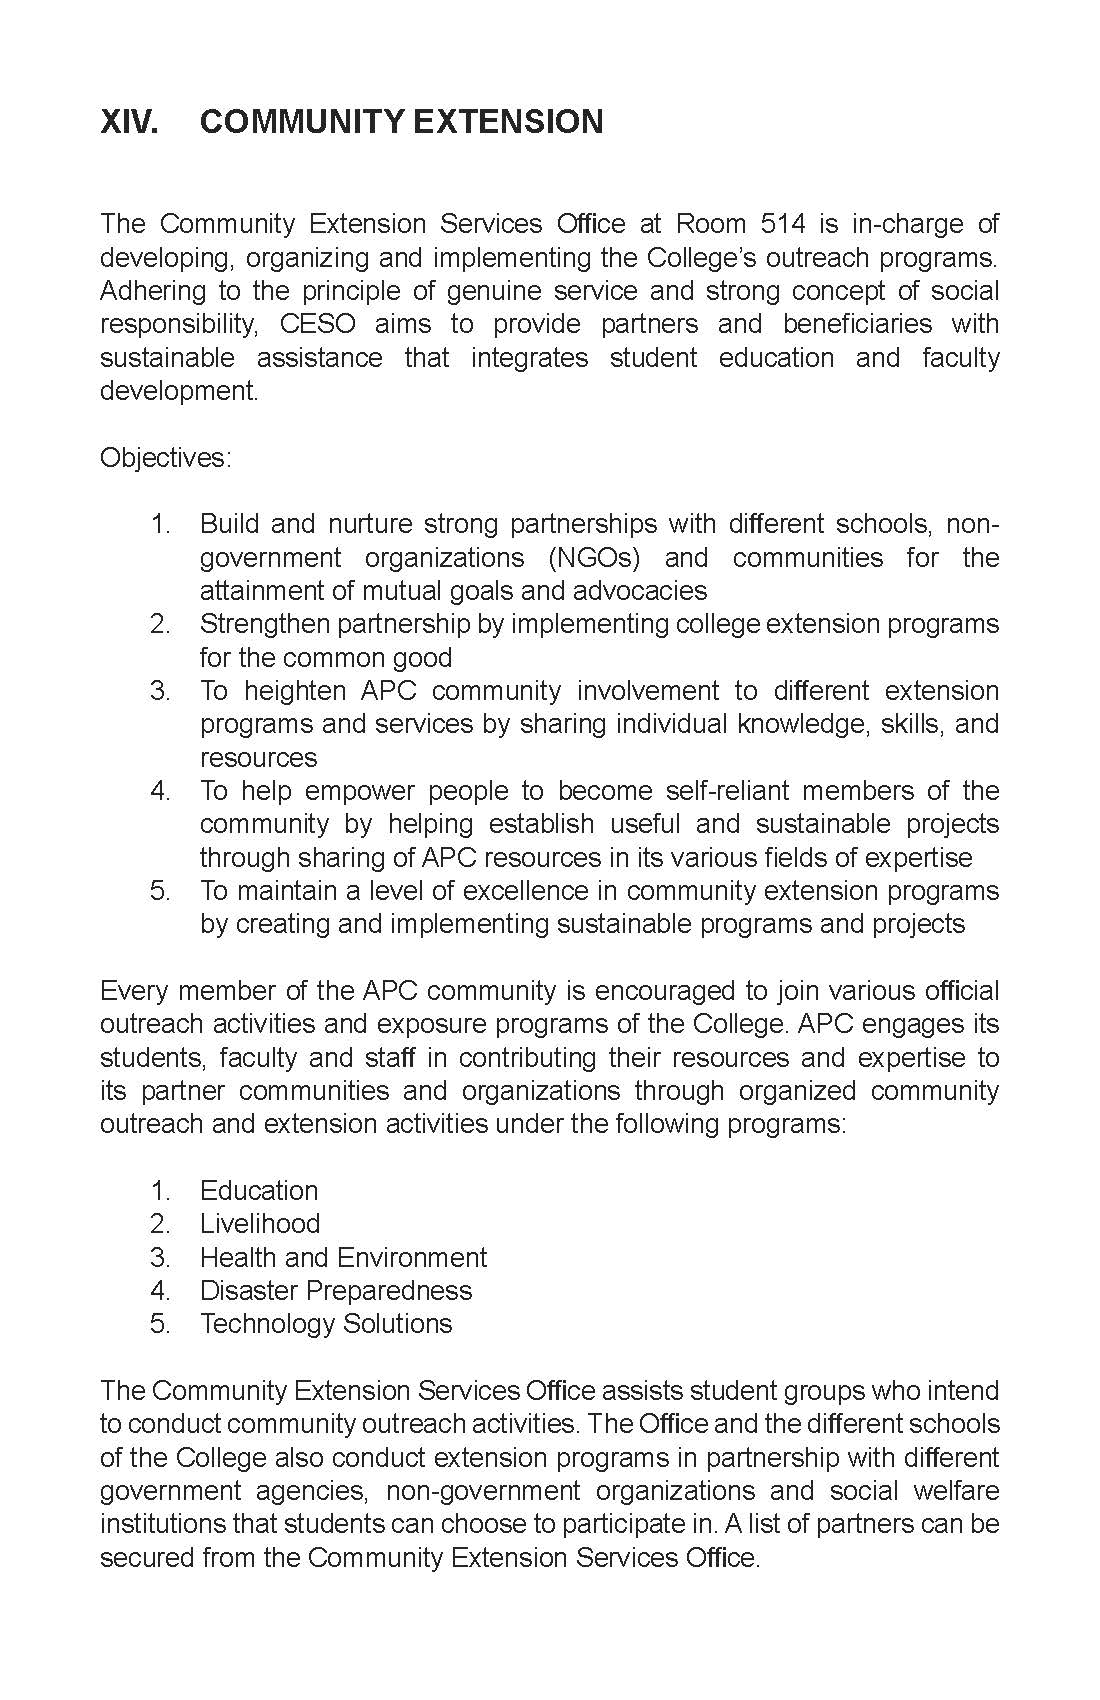 Community Extension Playbook_Page_1